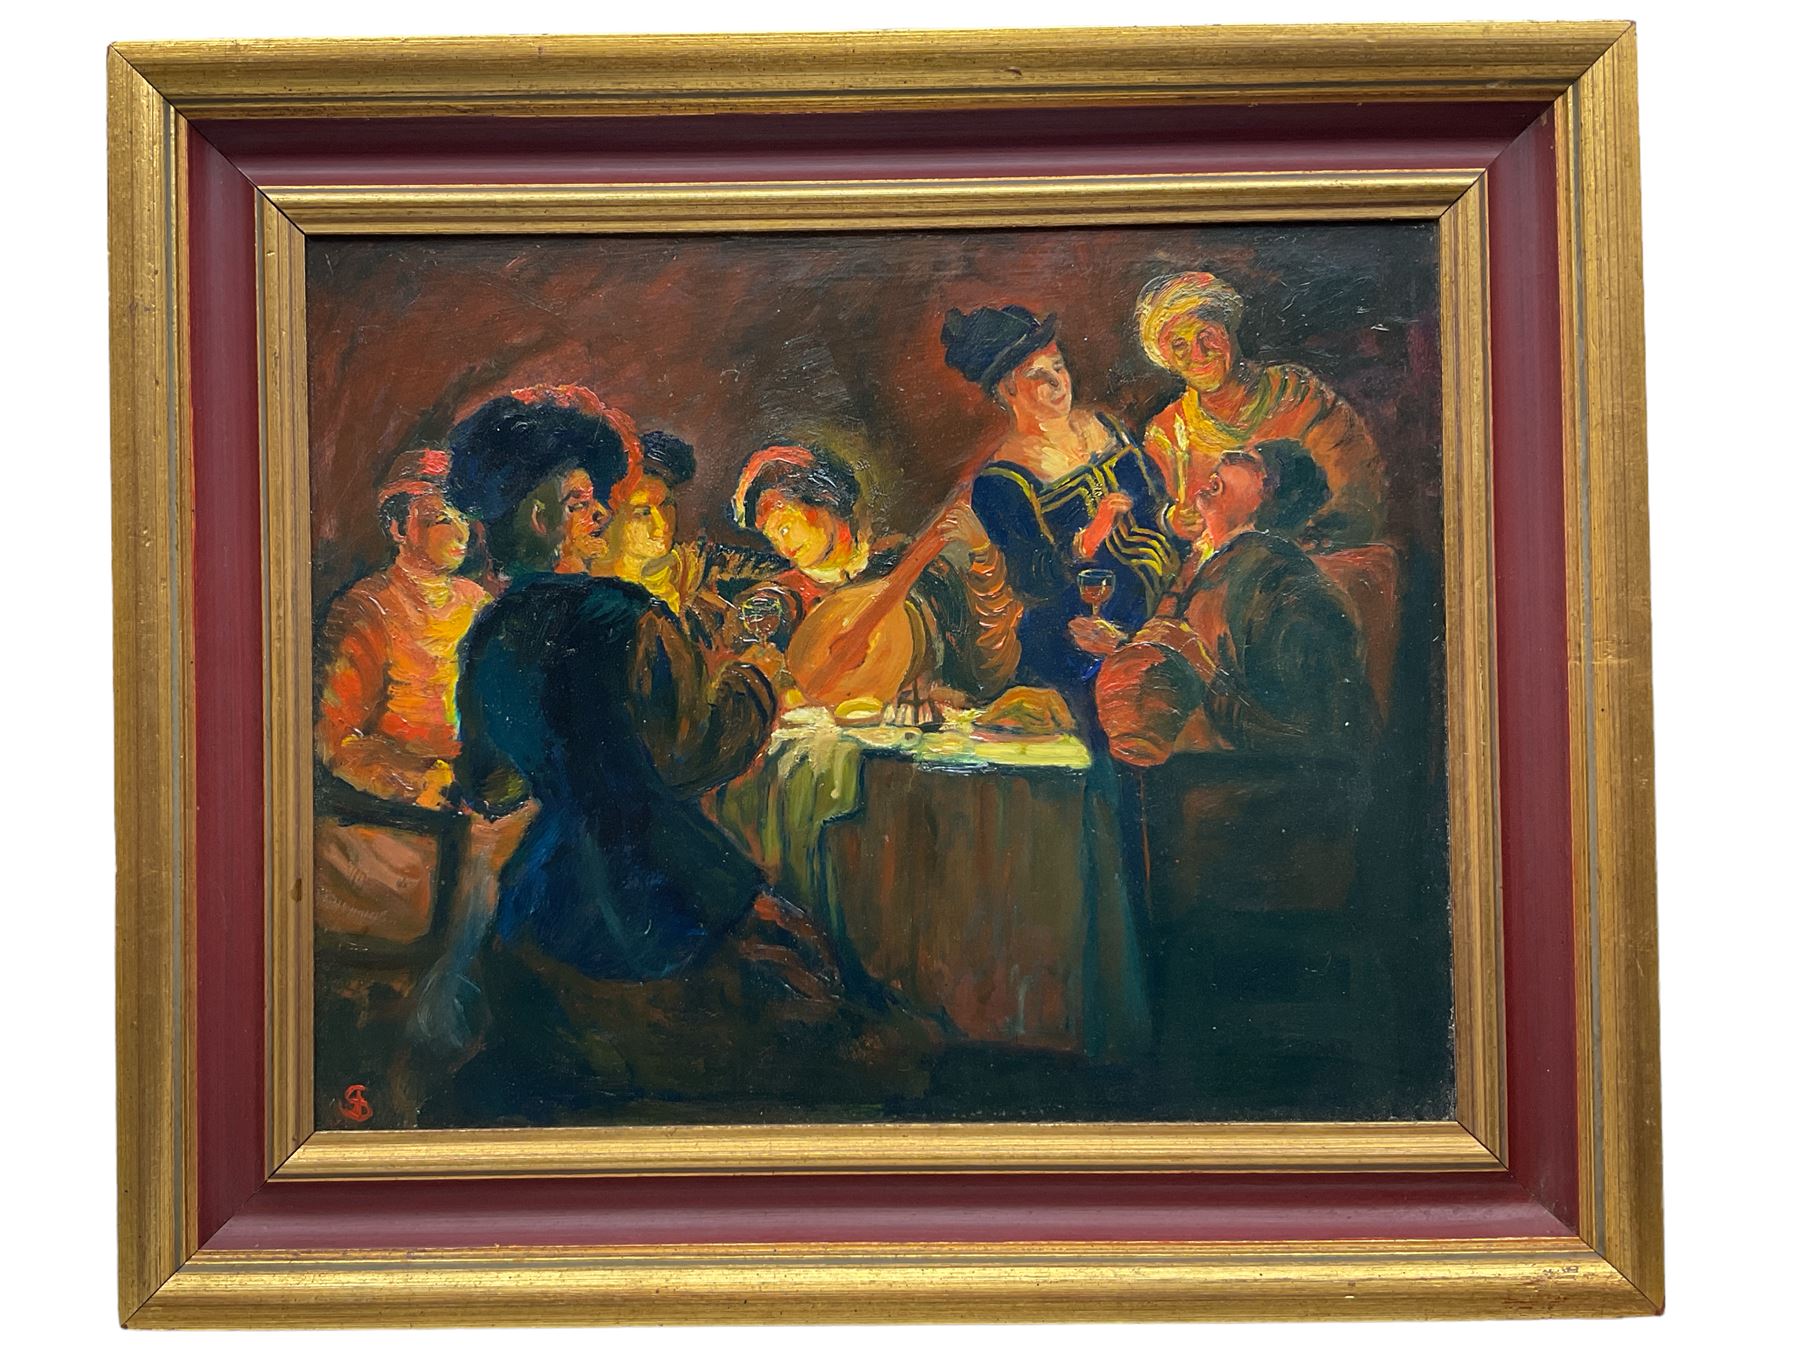 Continental School (20th century): Dinner Party with Lute Player